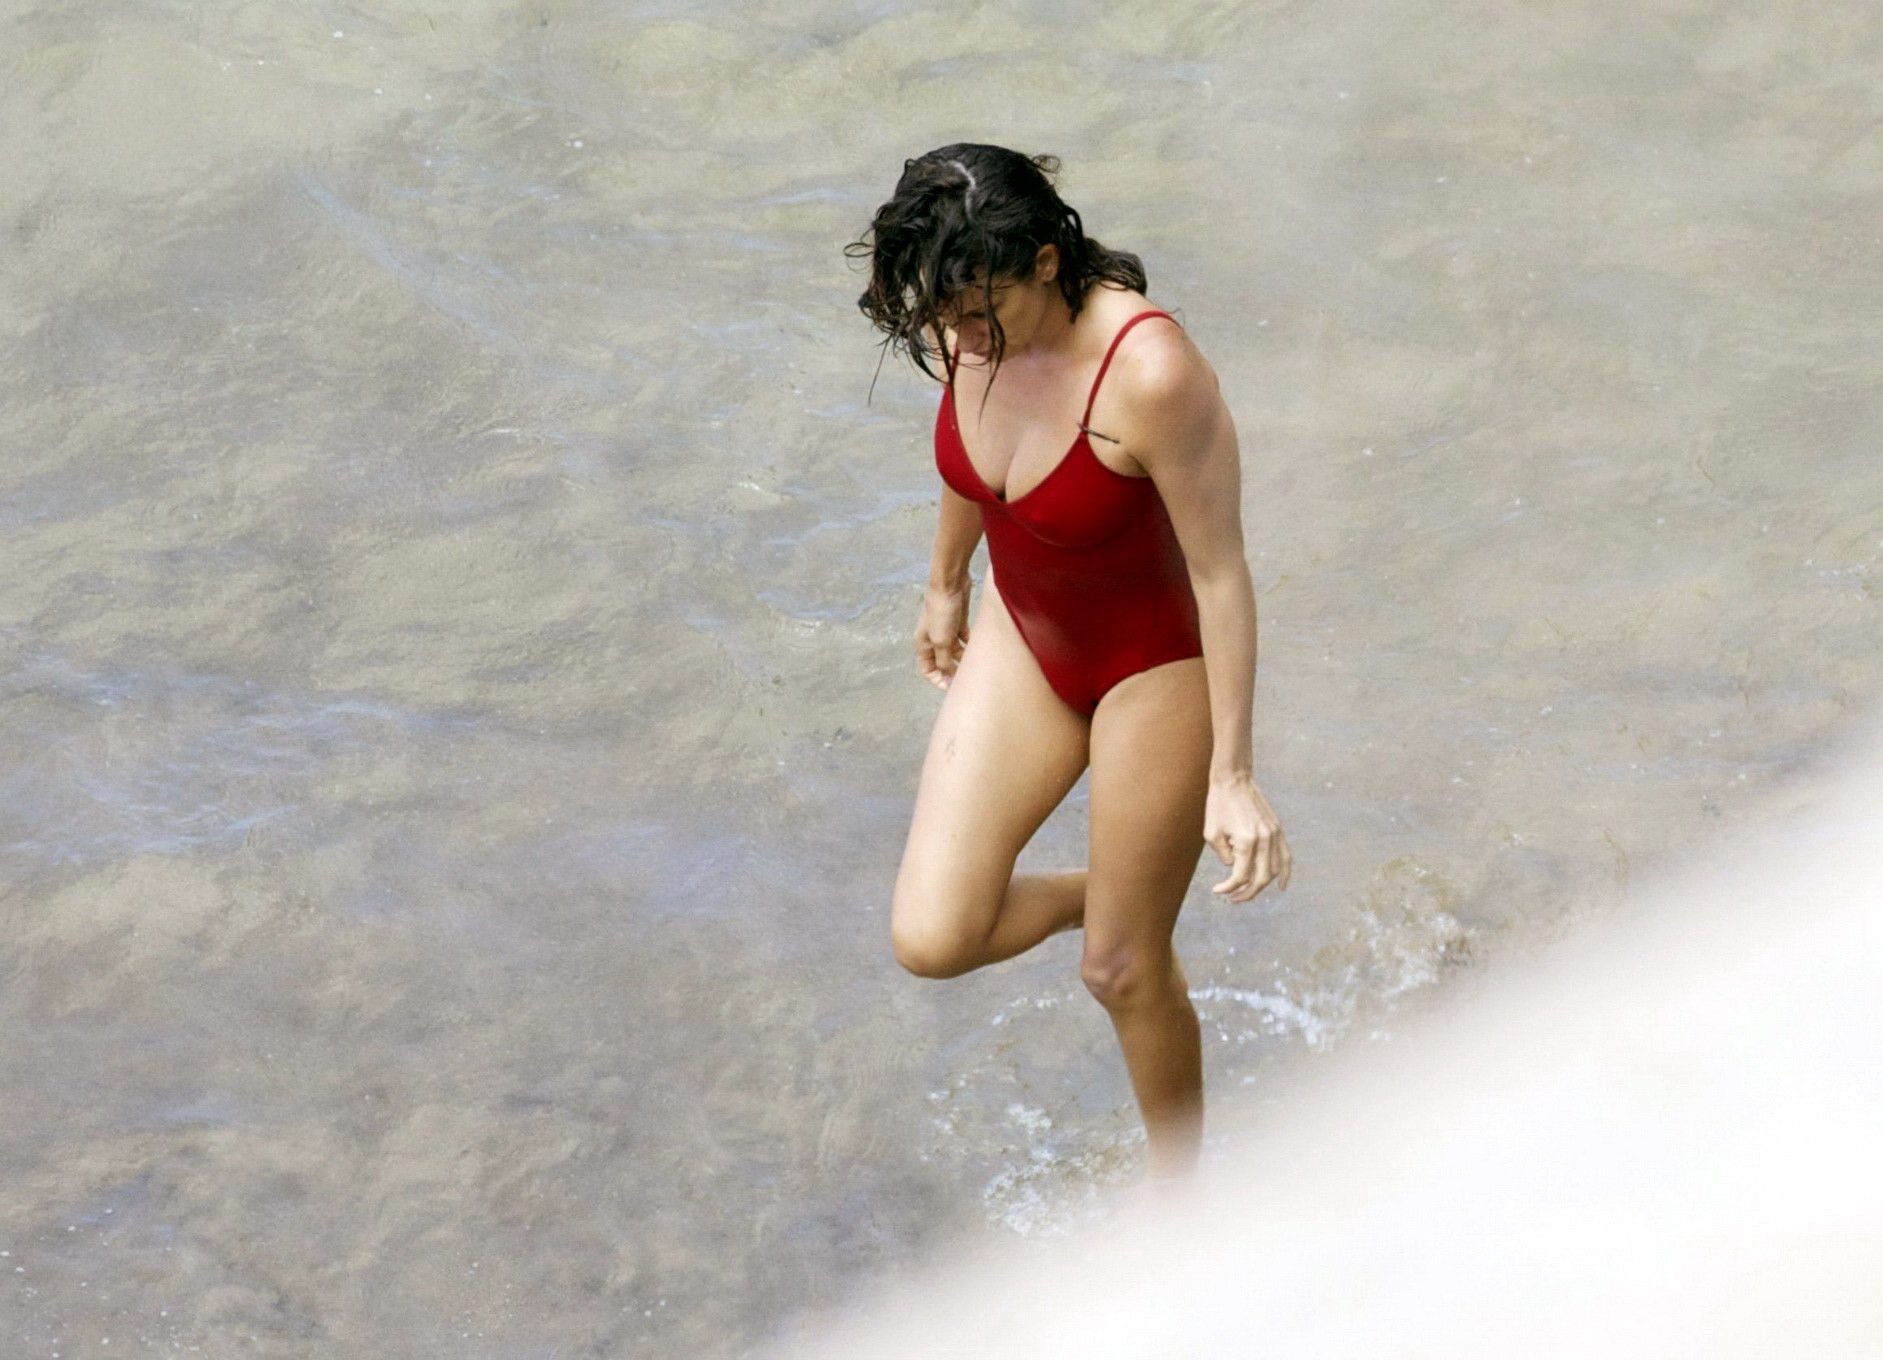 Penelope Cruz showing pokies on a beach wearing a sexy red swimsuit #75192187